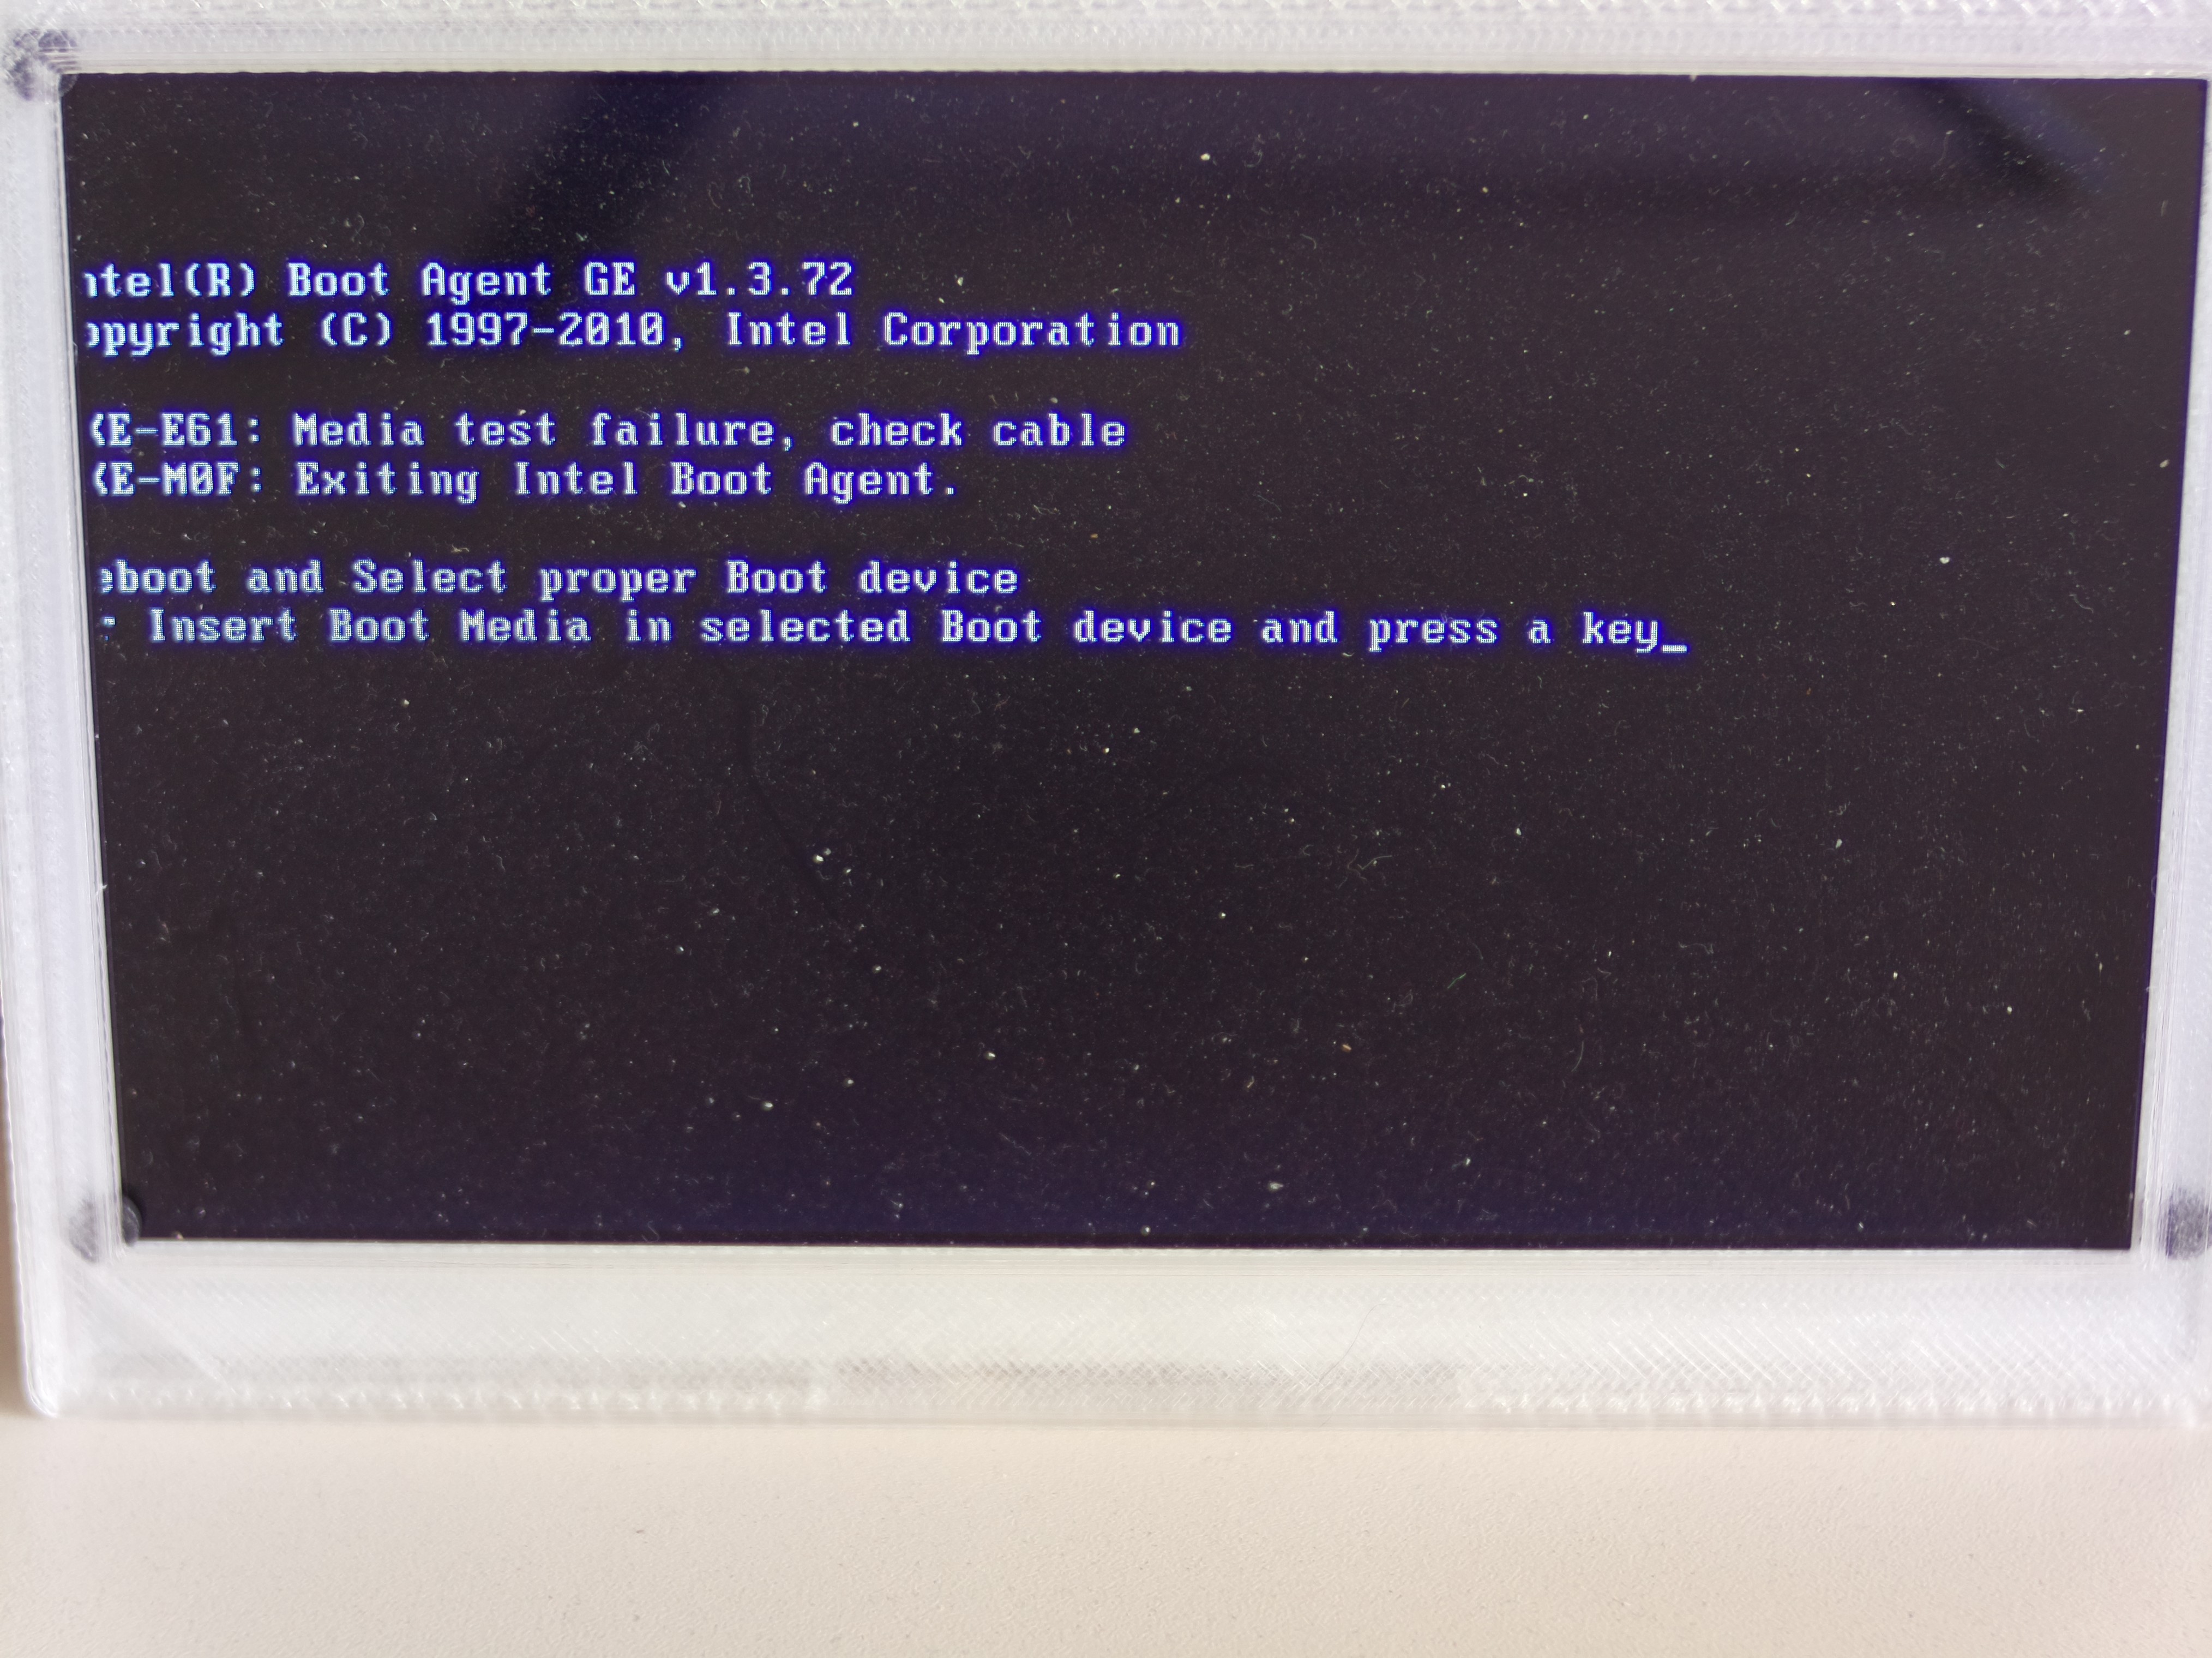 Error message at boot